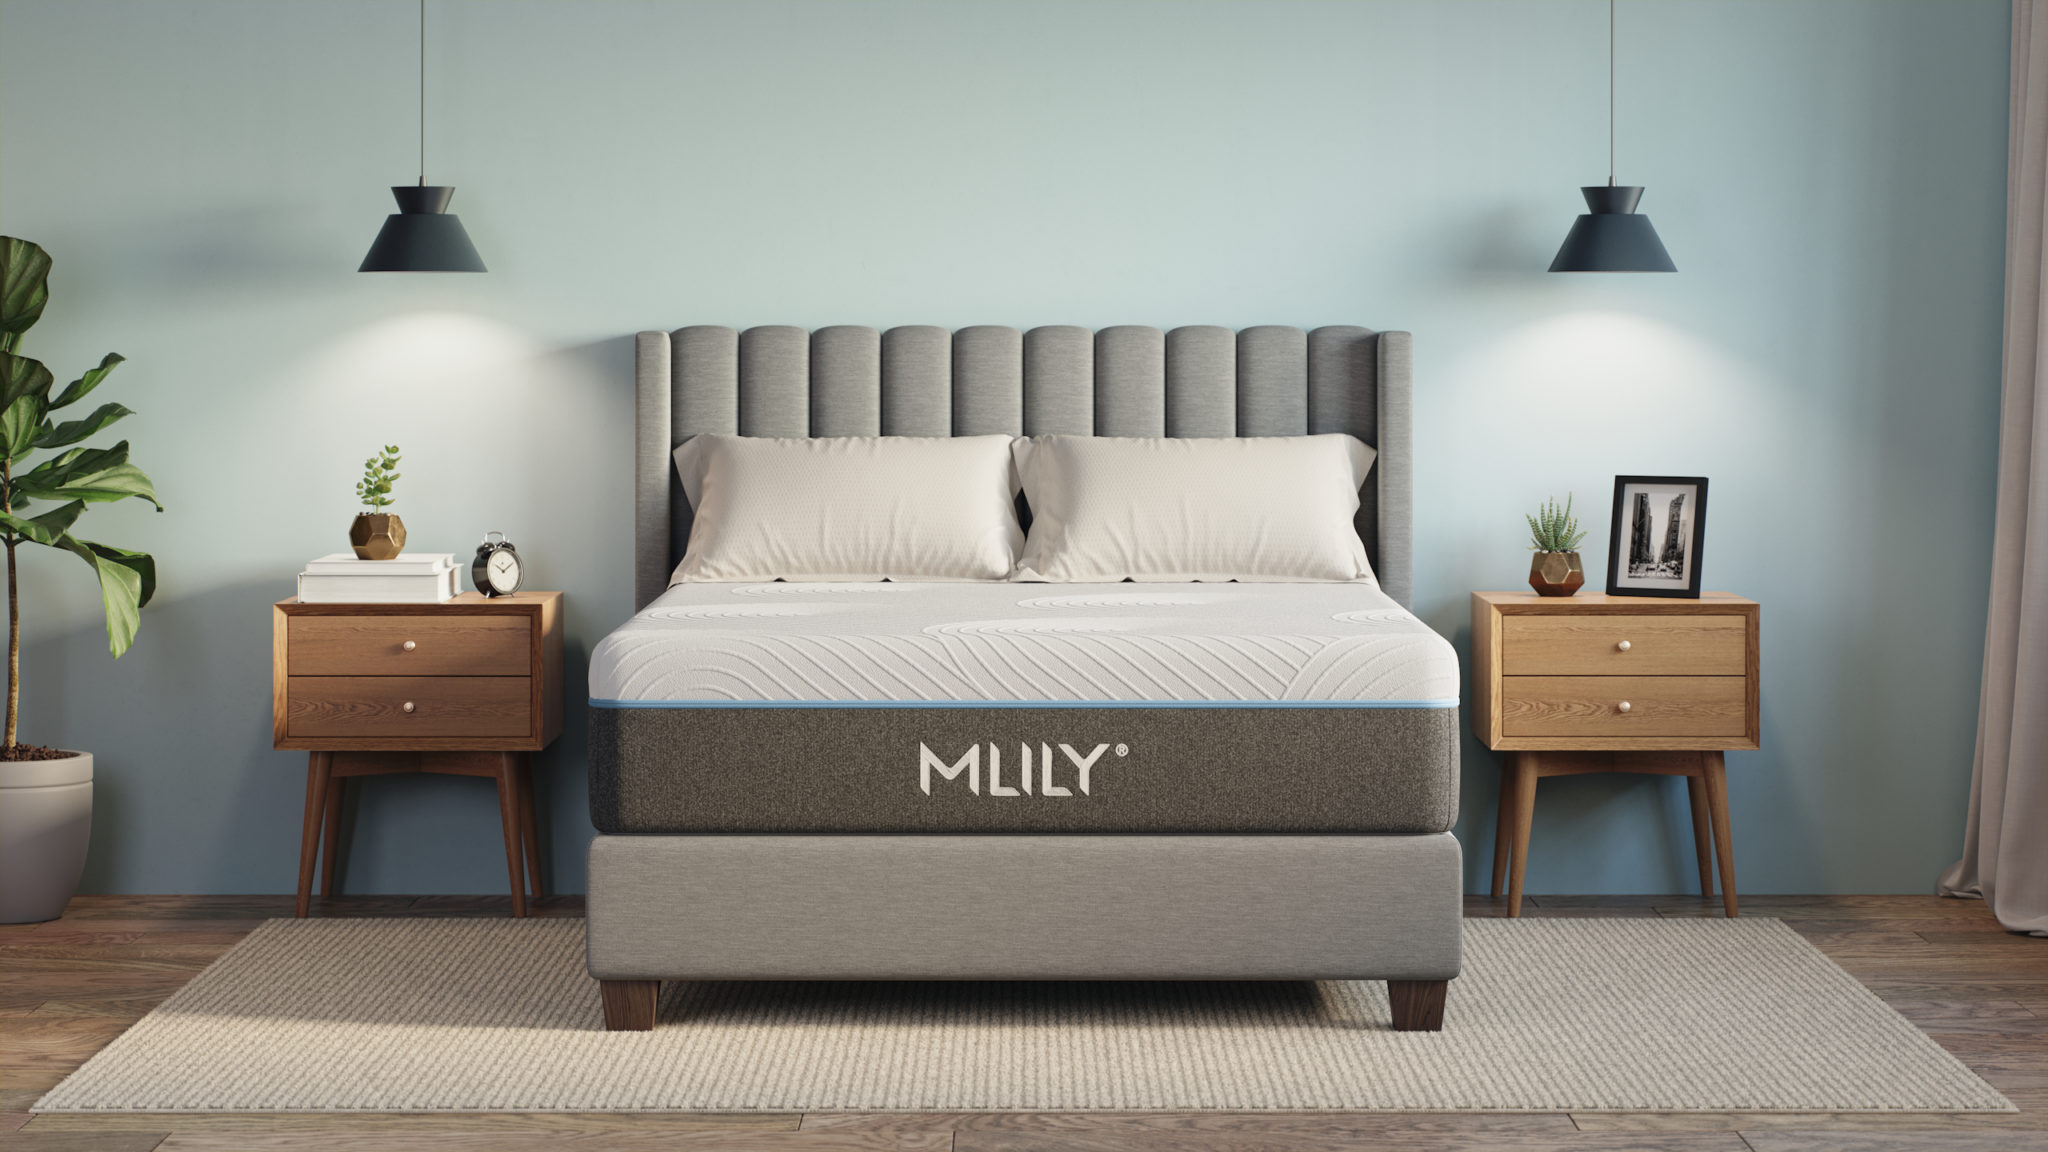 fusion_luxe_mlily_mattress